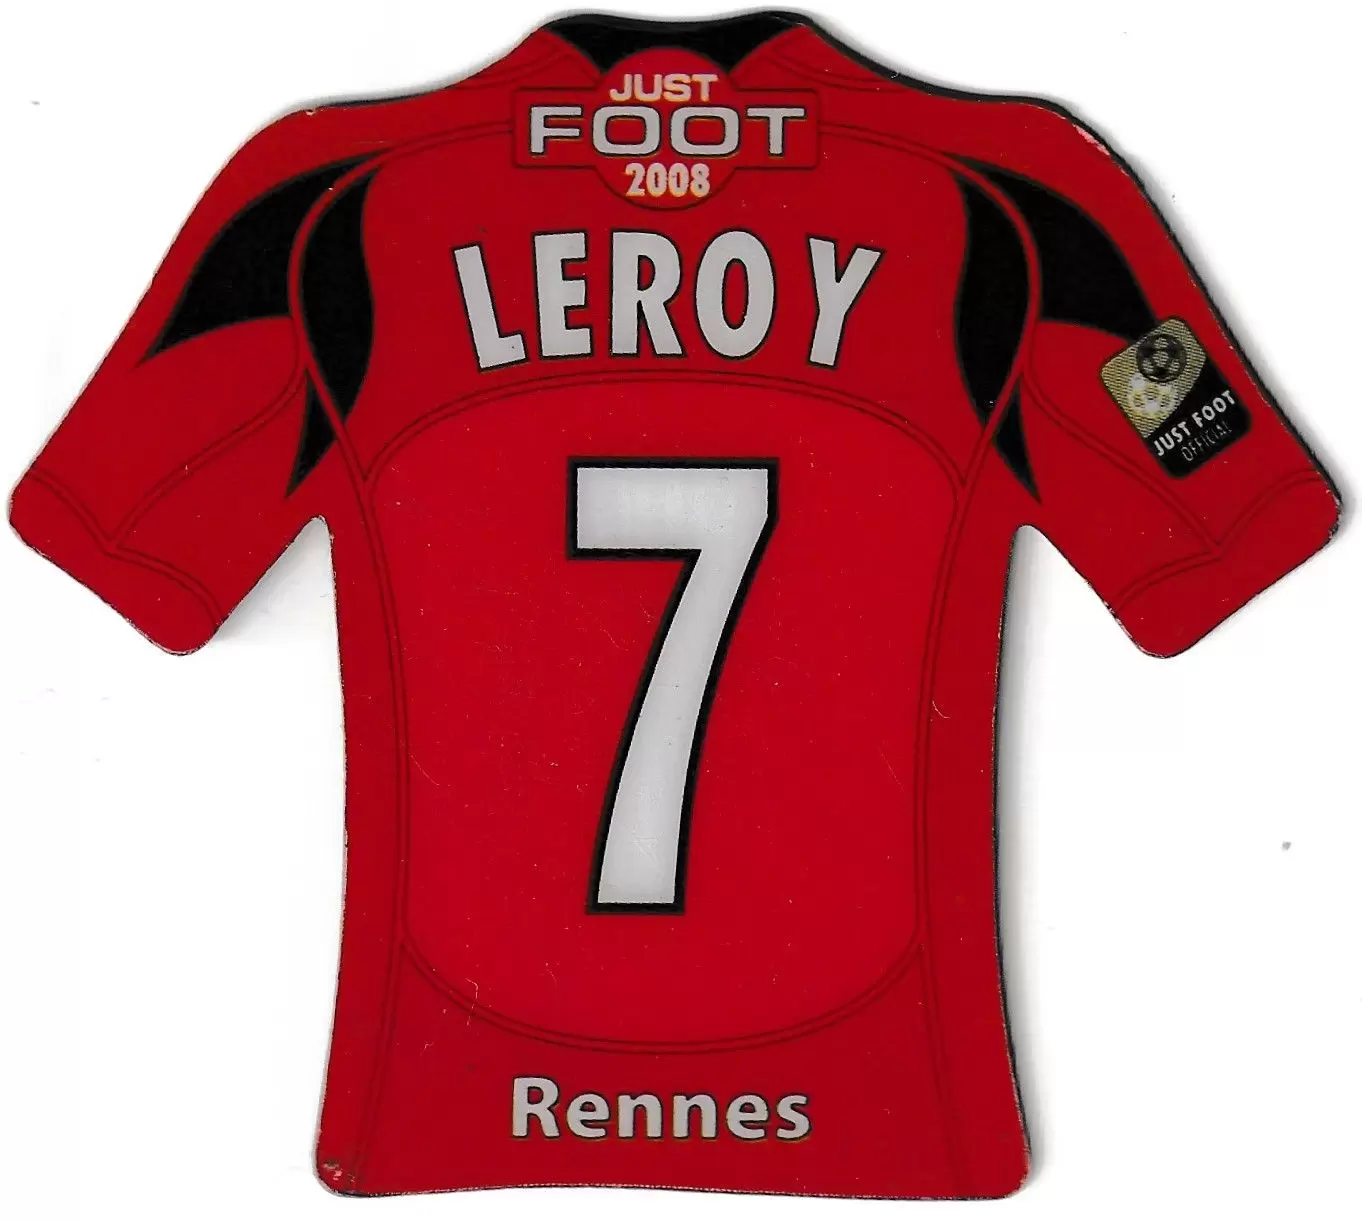 Just Foot 2008 - Rennes 7 - Leroy